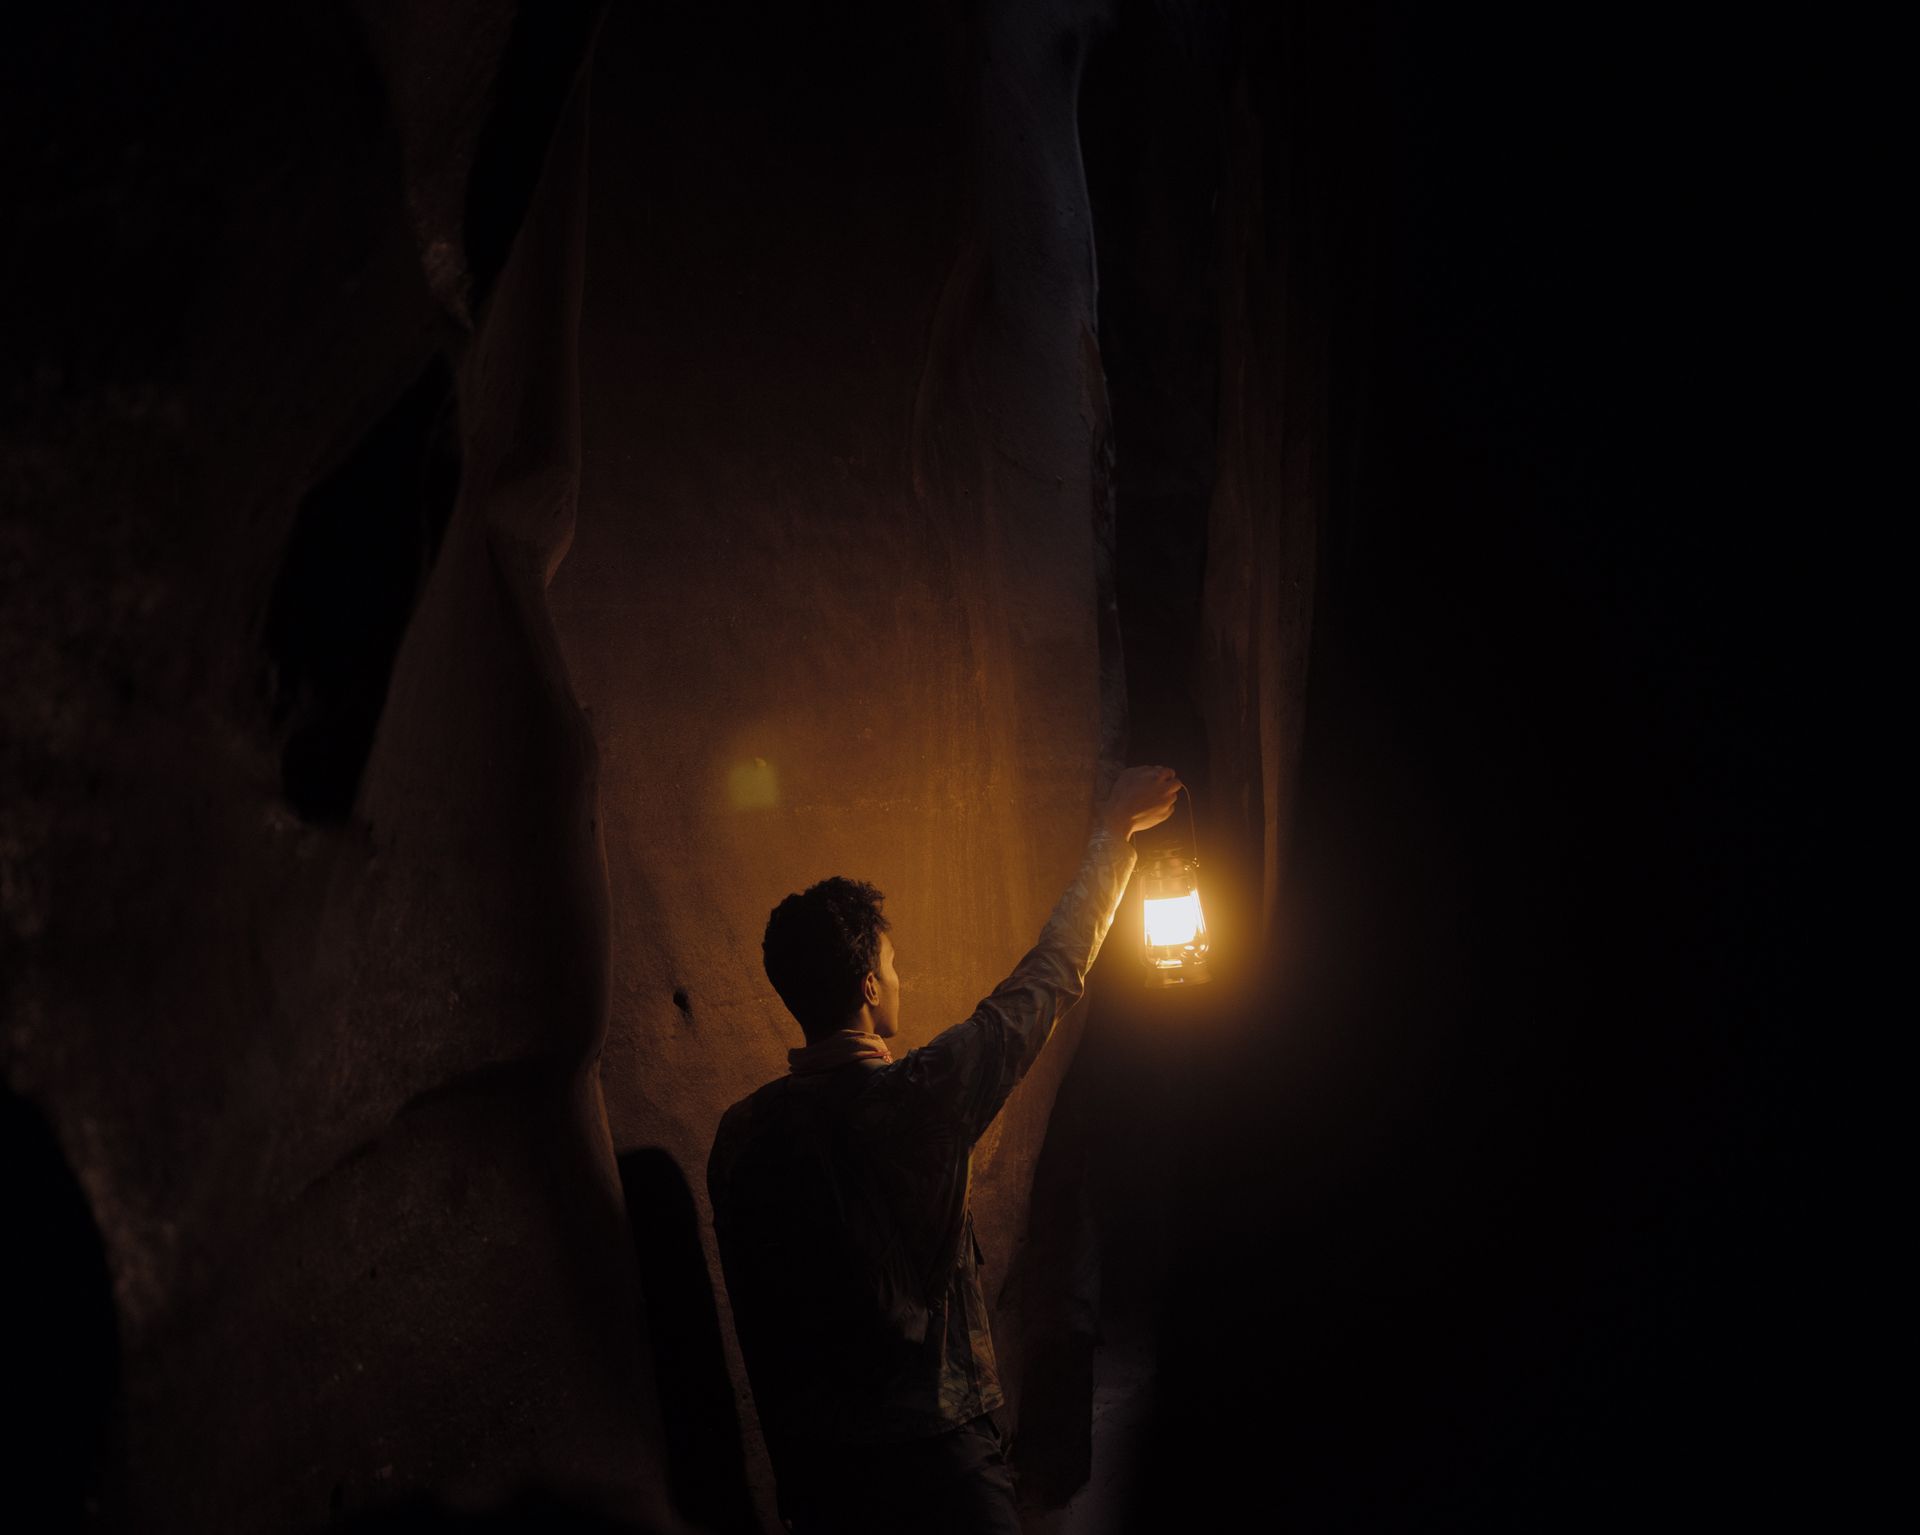 man searching in dark cave holding a lamp in right outstretched arm